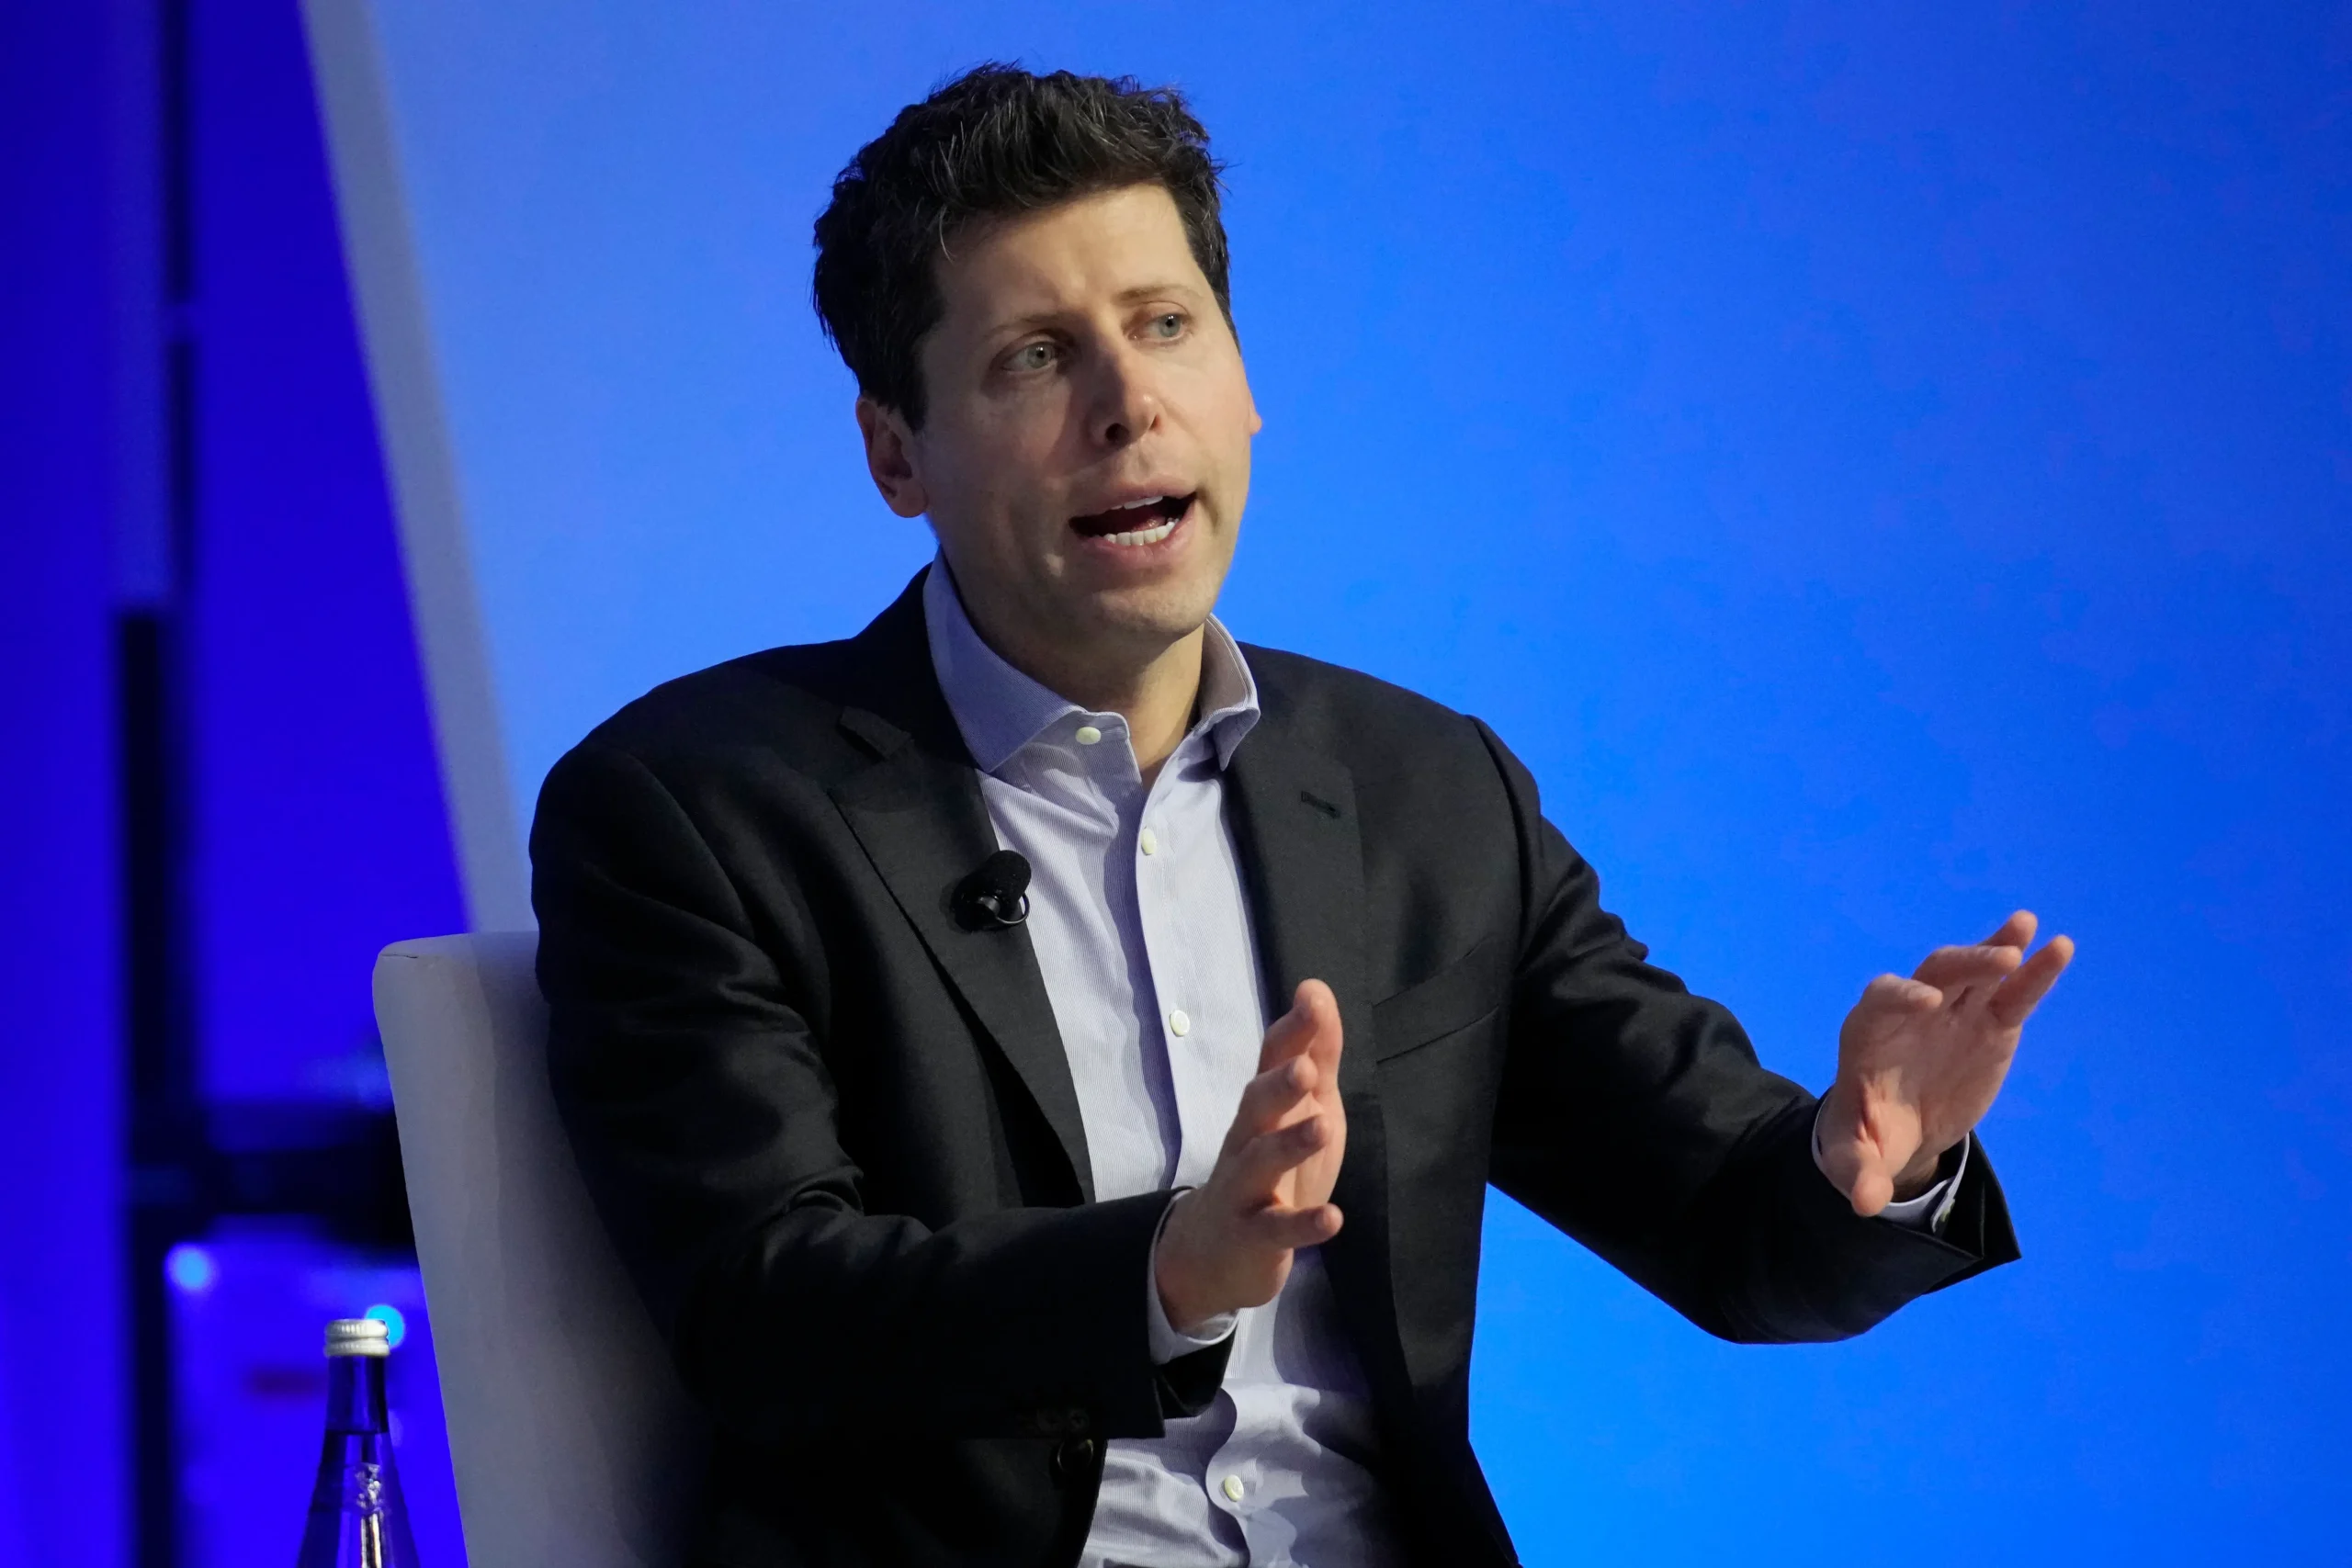 Sam Altman in recent summit telling about his ambitions about AI chips